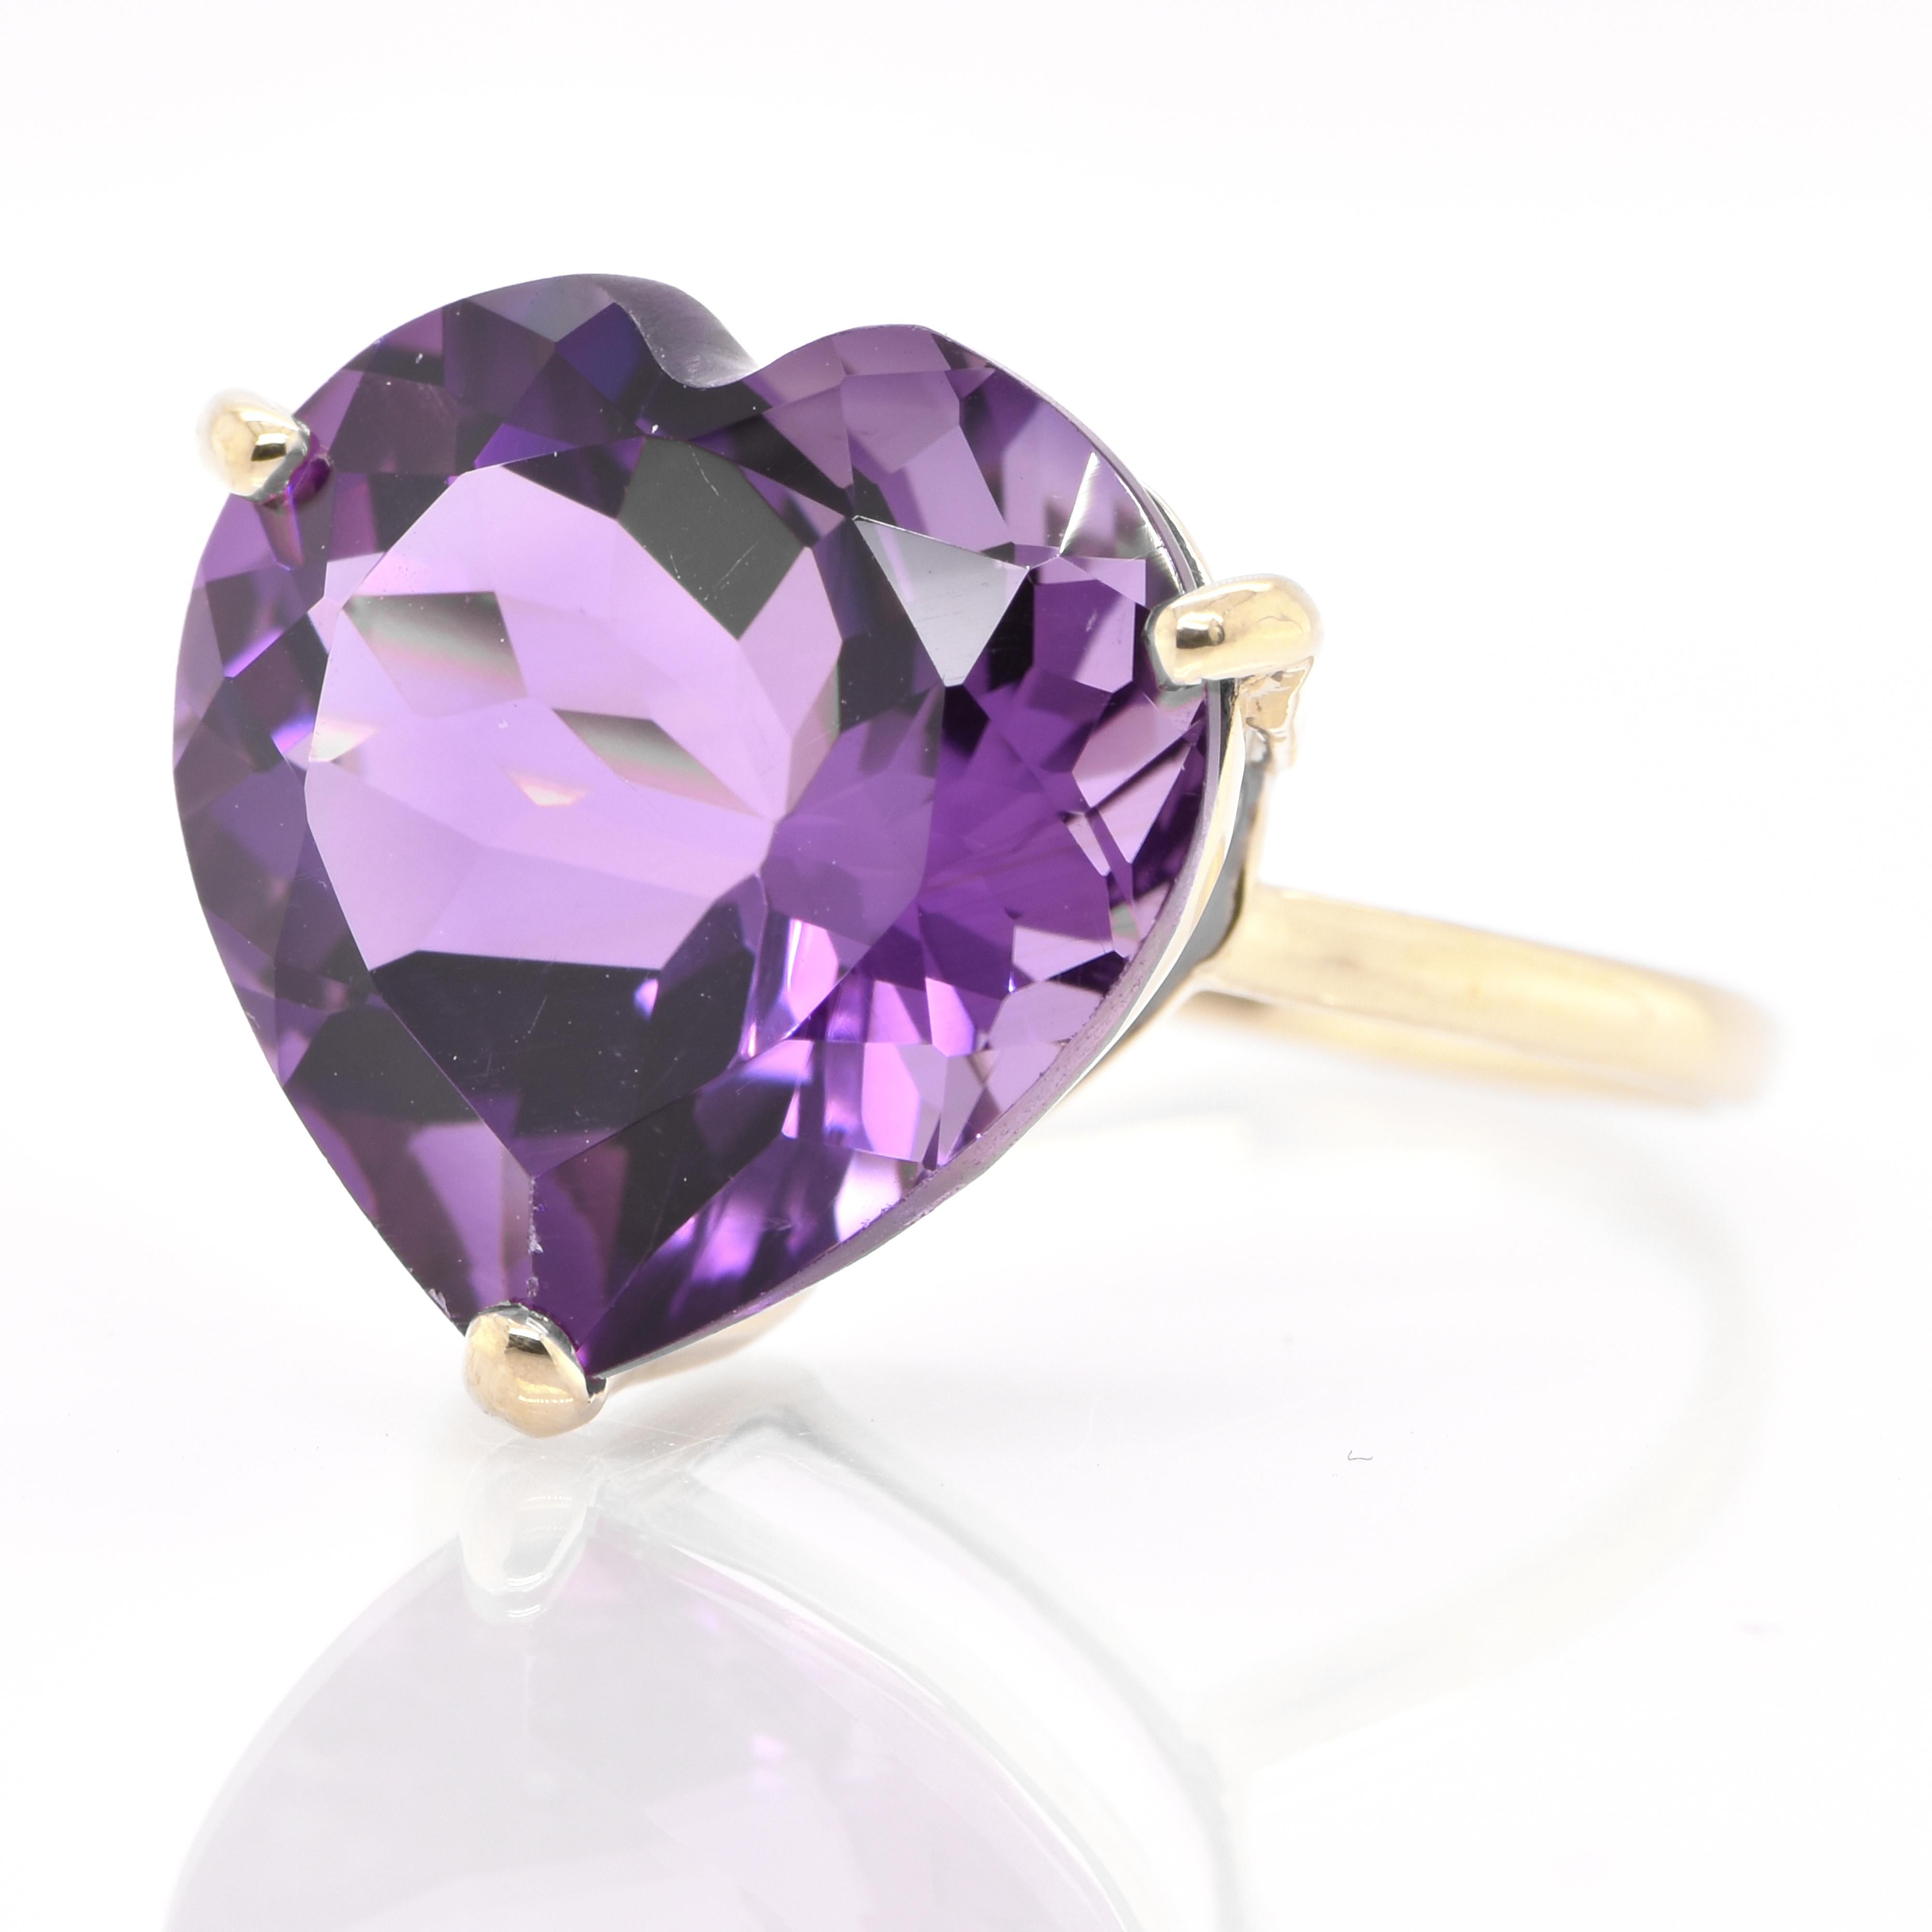 A beautiful Cocktail Ring featuring a 10.00 Carat, Natural Heart-Cut Amethyst set in 18 Karat Yellow Gold. Amethyst has been the most-prized quartz for centuries. The ancient Greeks thought it had magical and medicinal properties. Fine amethysts